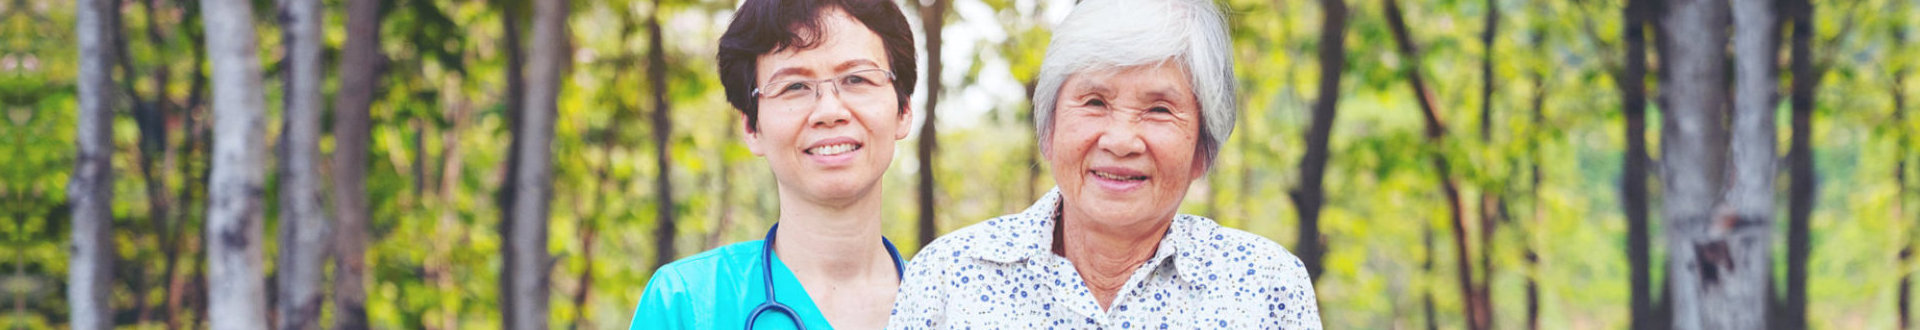 adult caregiver with senior woman